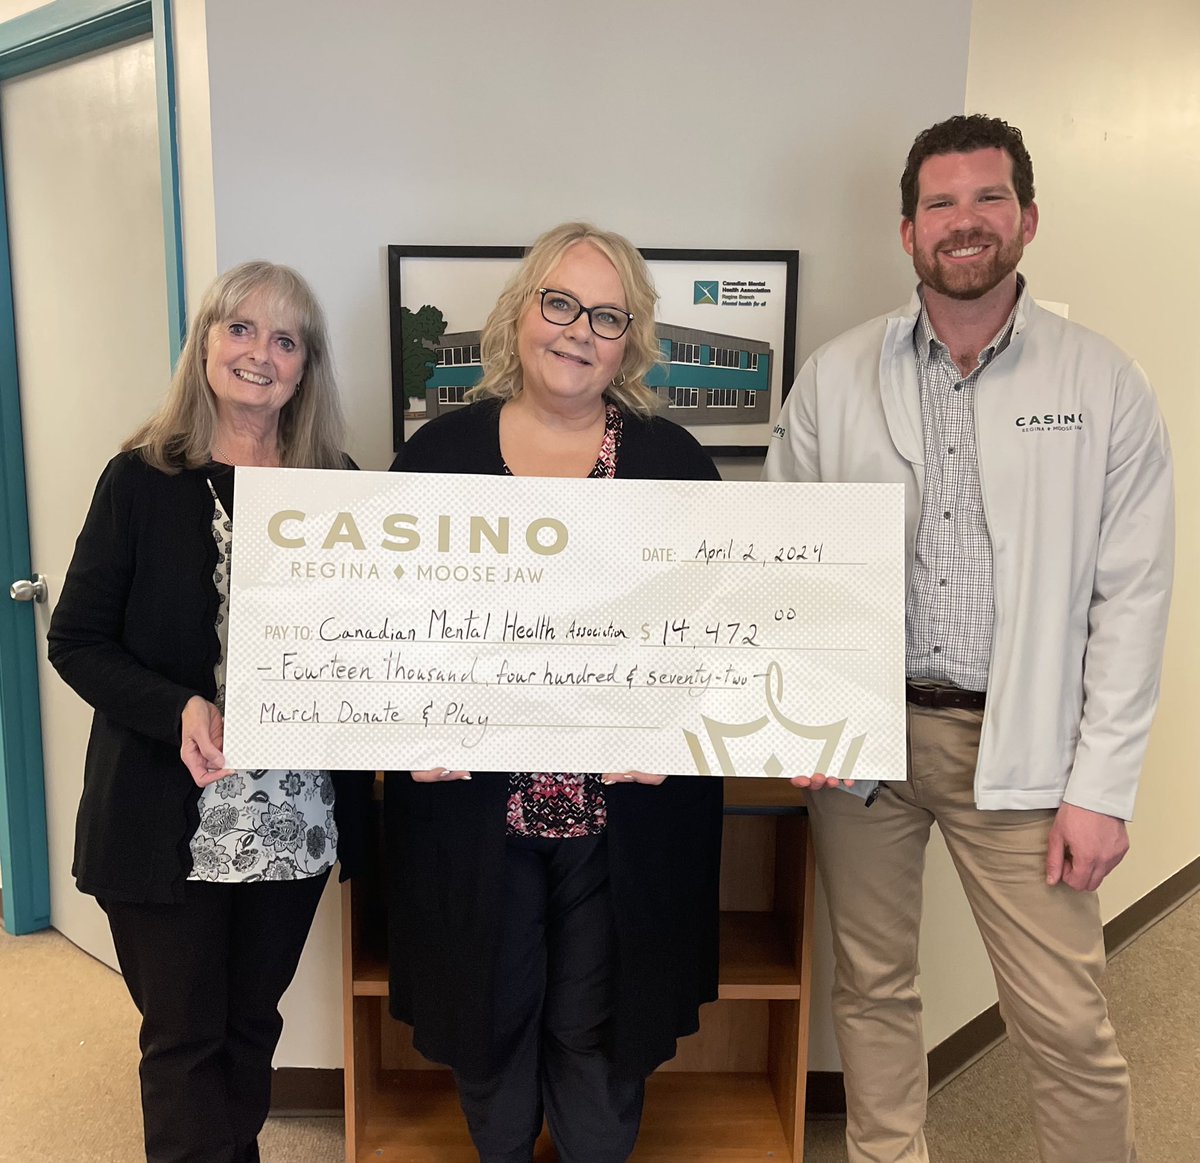 Sending out a big big thank you to Casino Regina and Moose Jaw!! Through their March Donate and Play program, they raised a phenomenal $14,472 for our branch. We are incredibly grateful for their donation and the positive impacts it will bring for mental health in our community💚